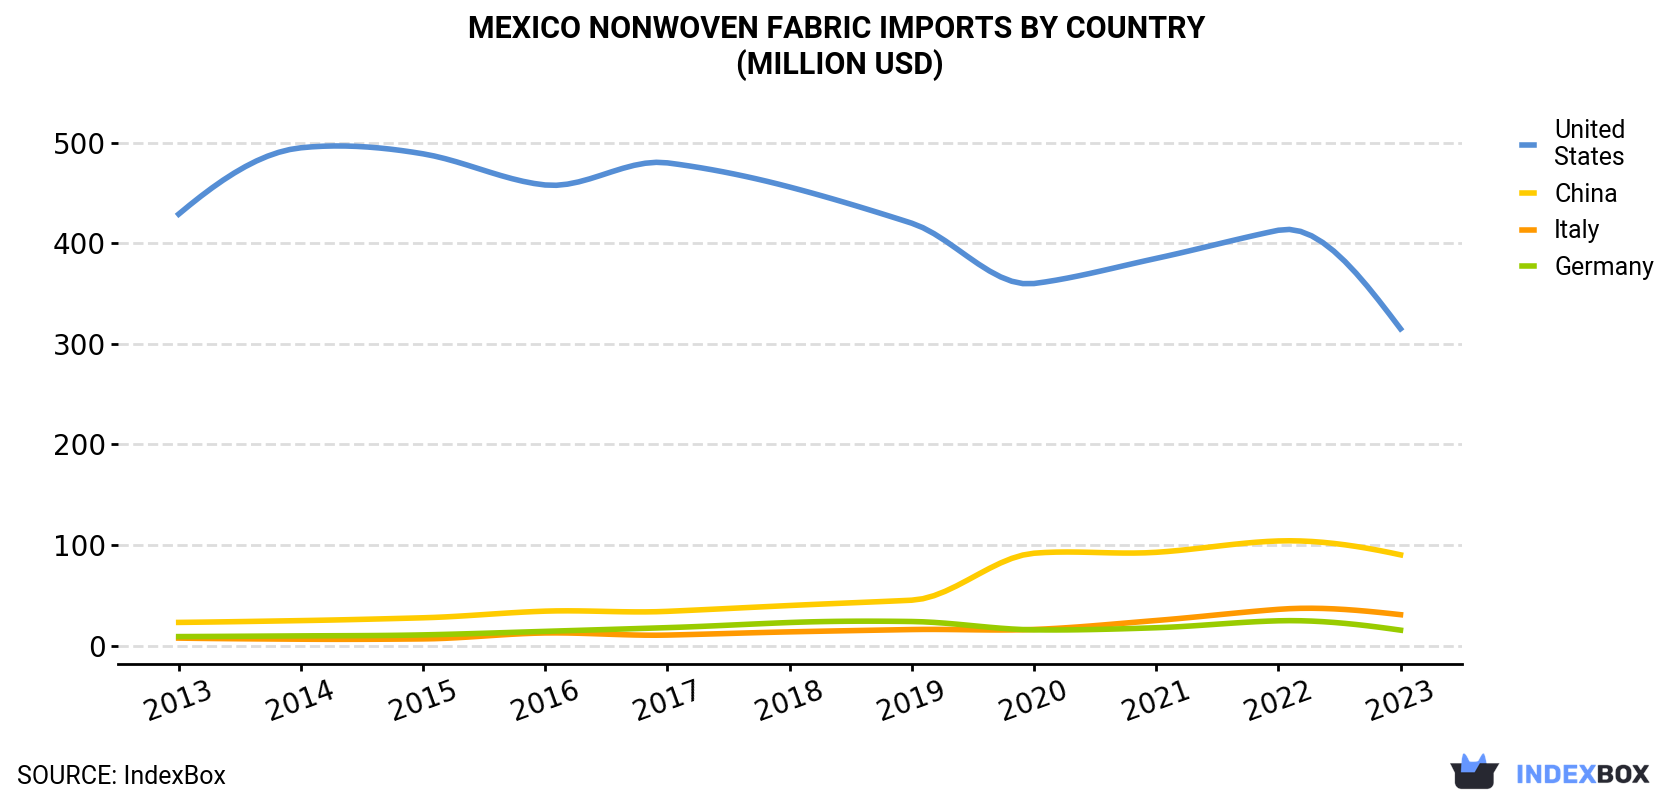 Mexico Nonwoven Fabric Imports By Country (Million USD)